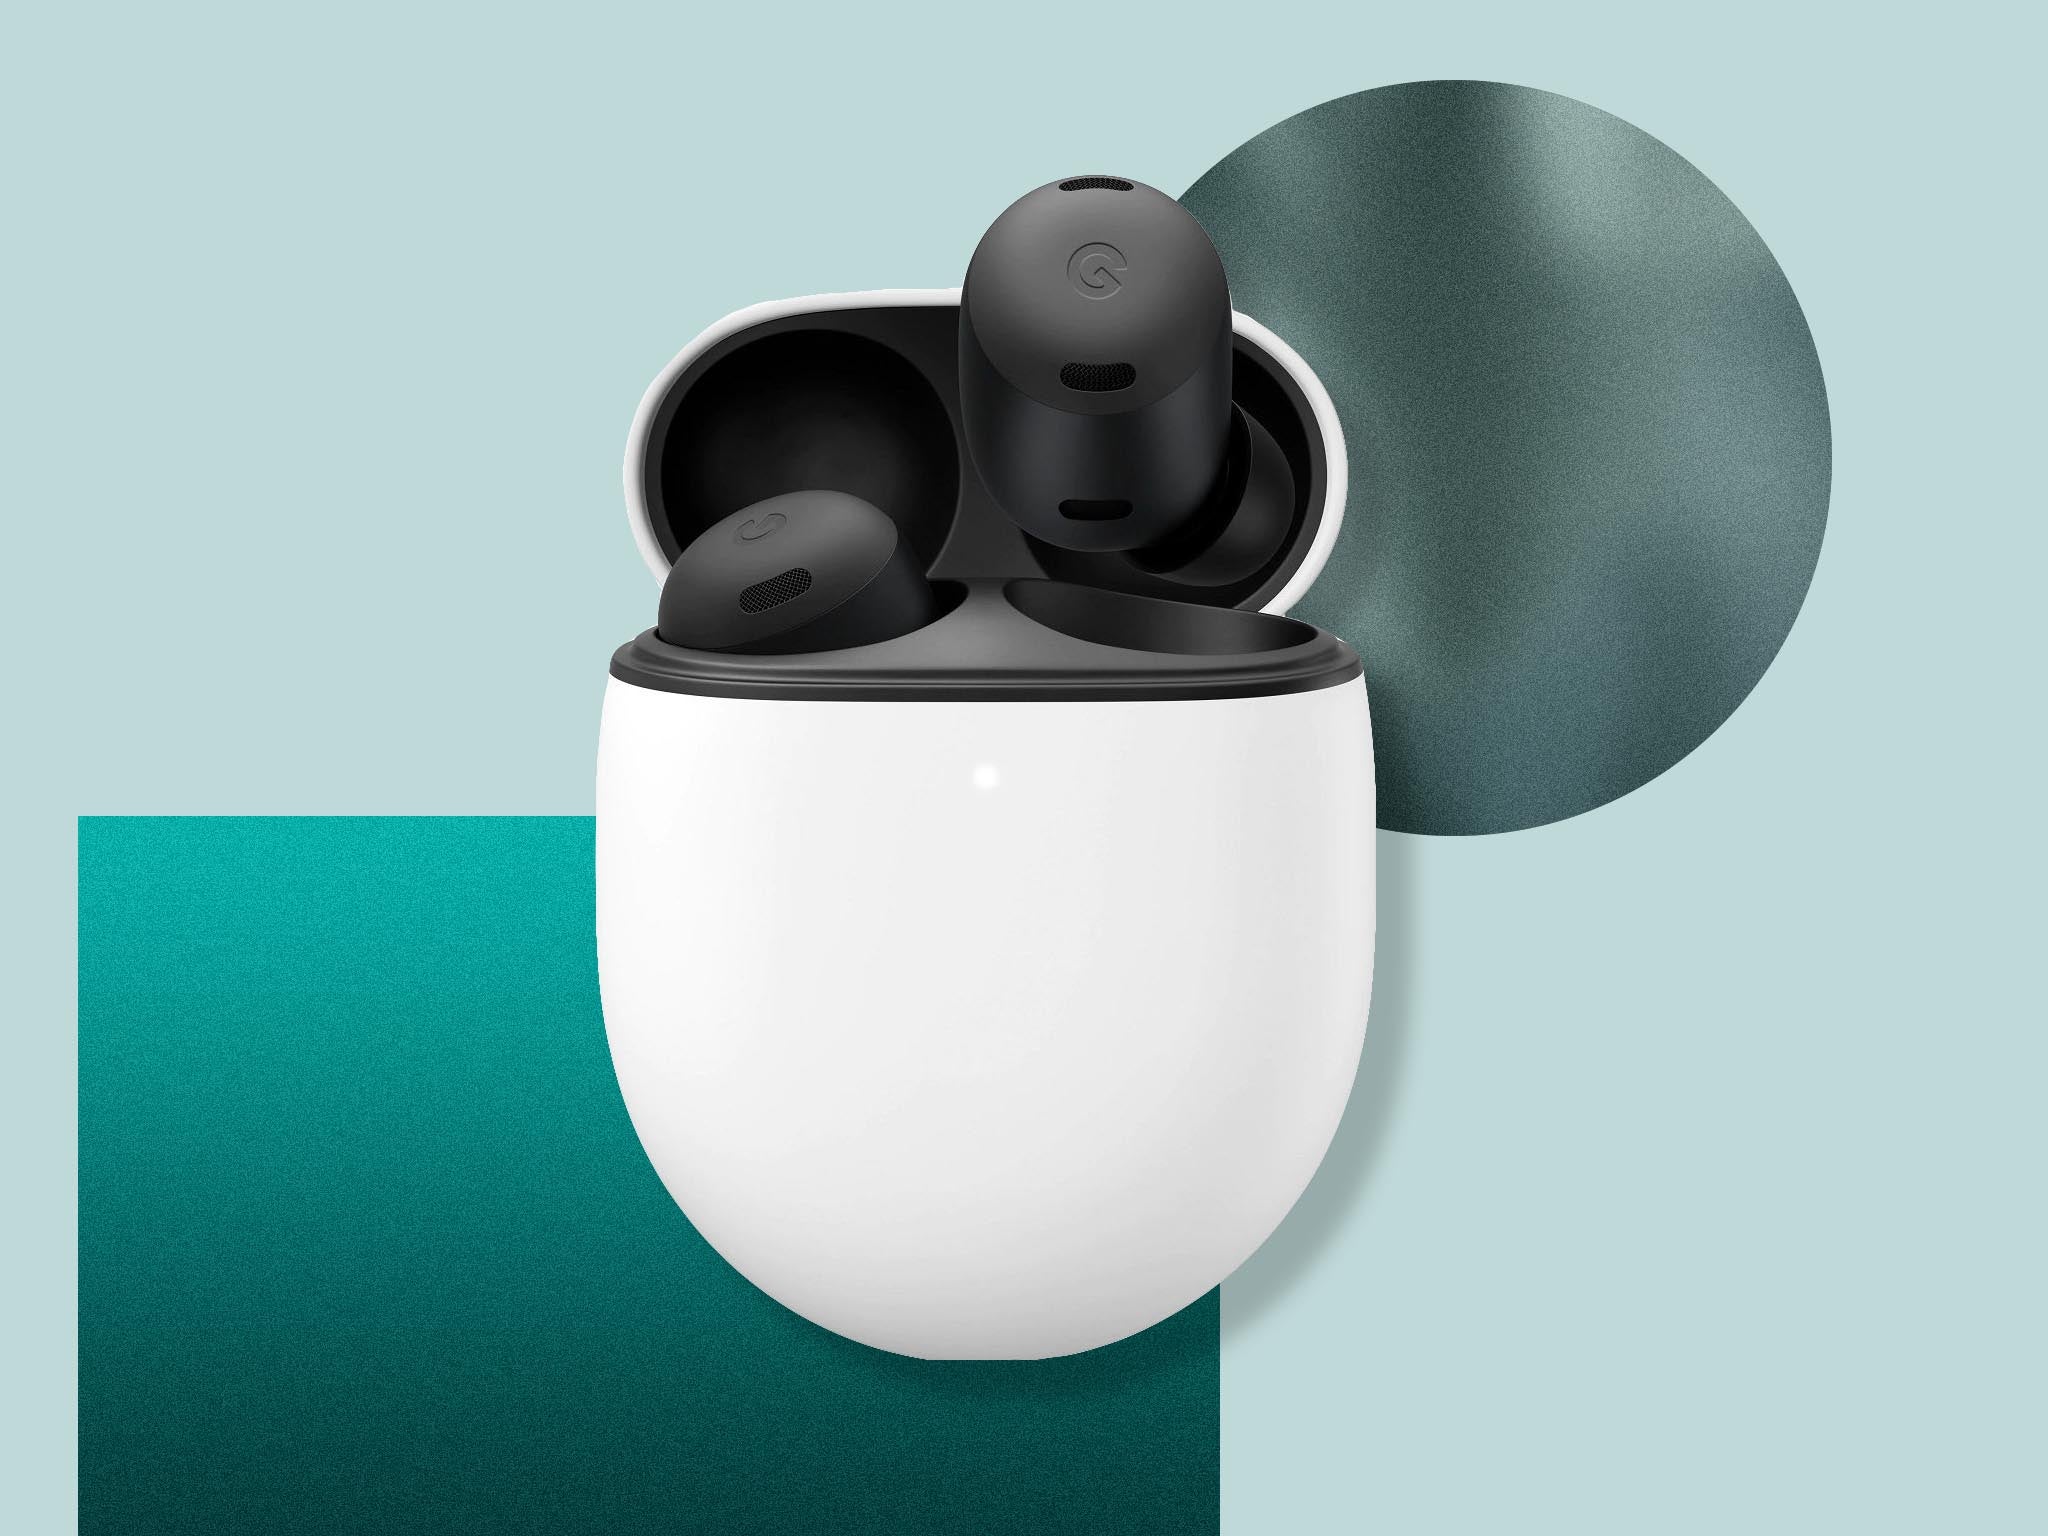 There’s a 20 per cent saving on the AirPods rivalling earbuds